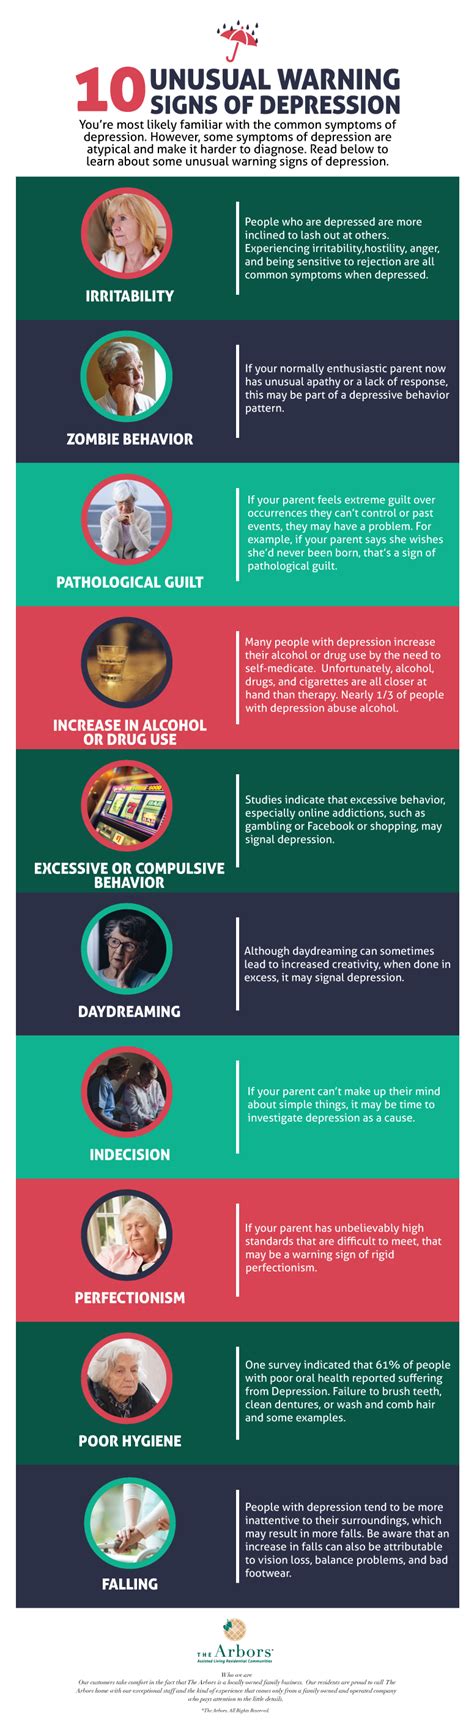 Infographic 10 Unusual Warning Signs Of Depression The Arbors The Ivy